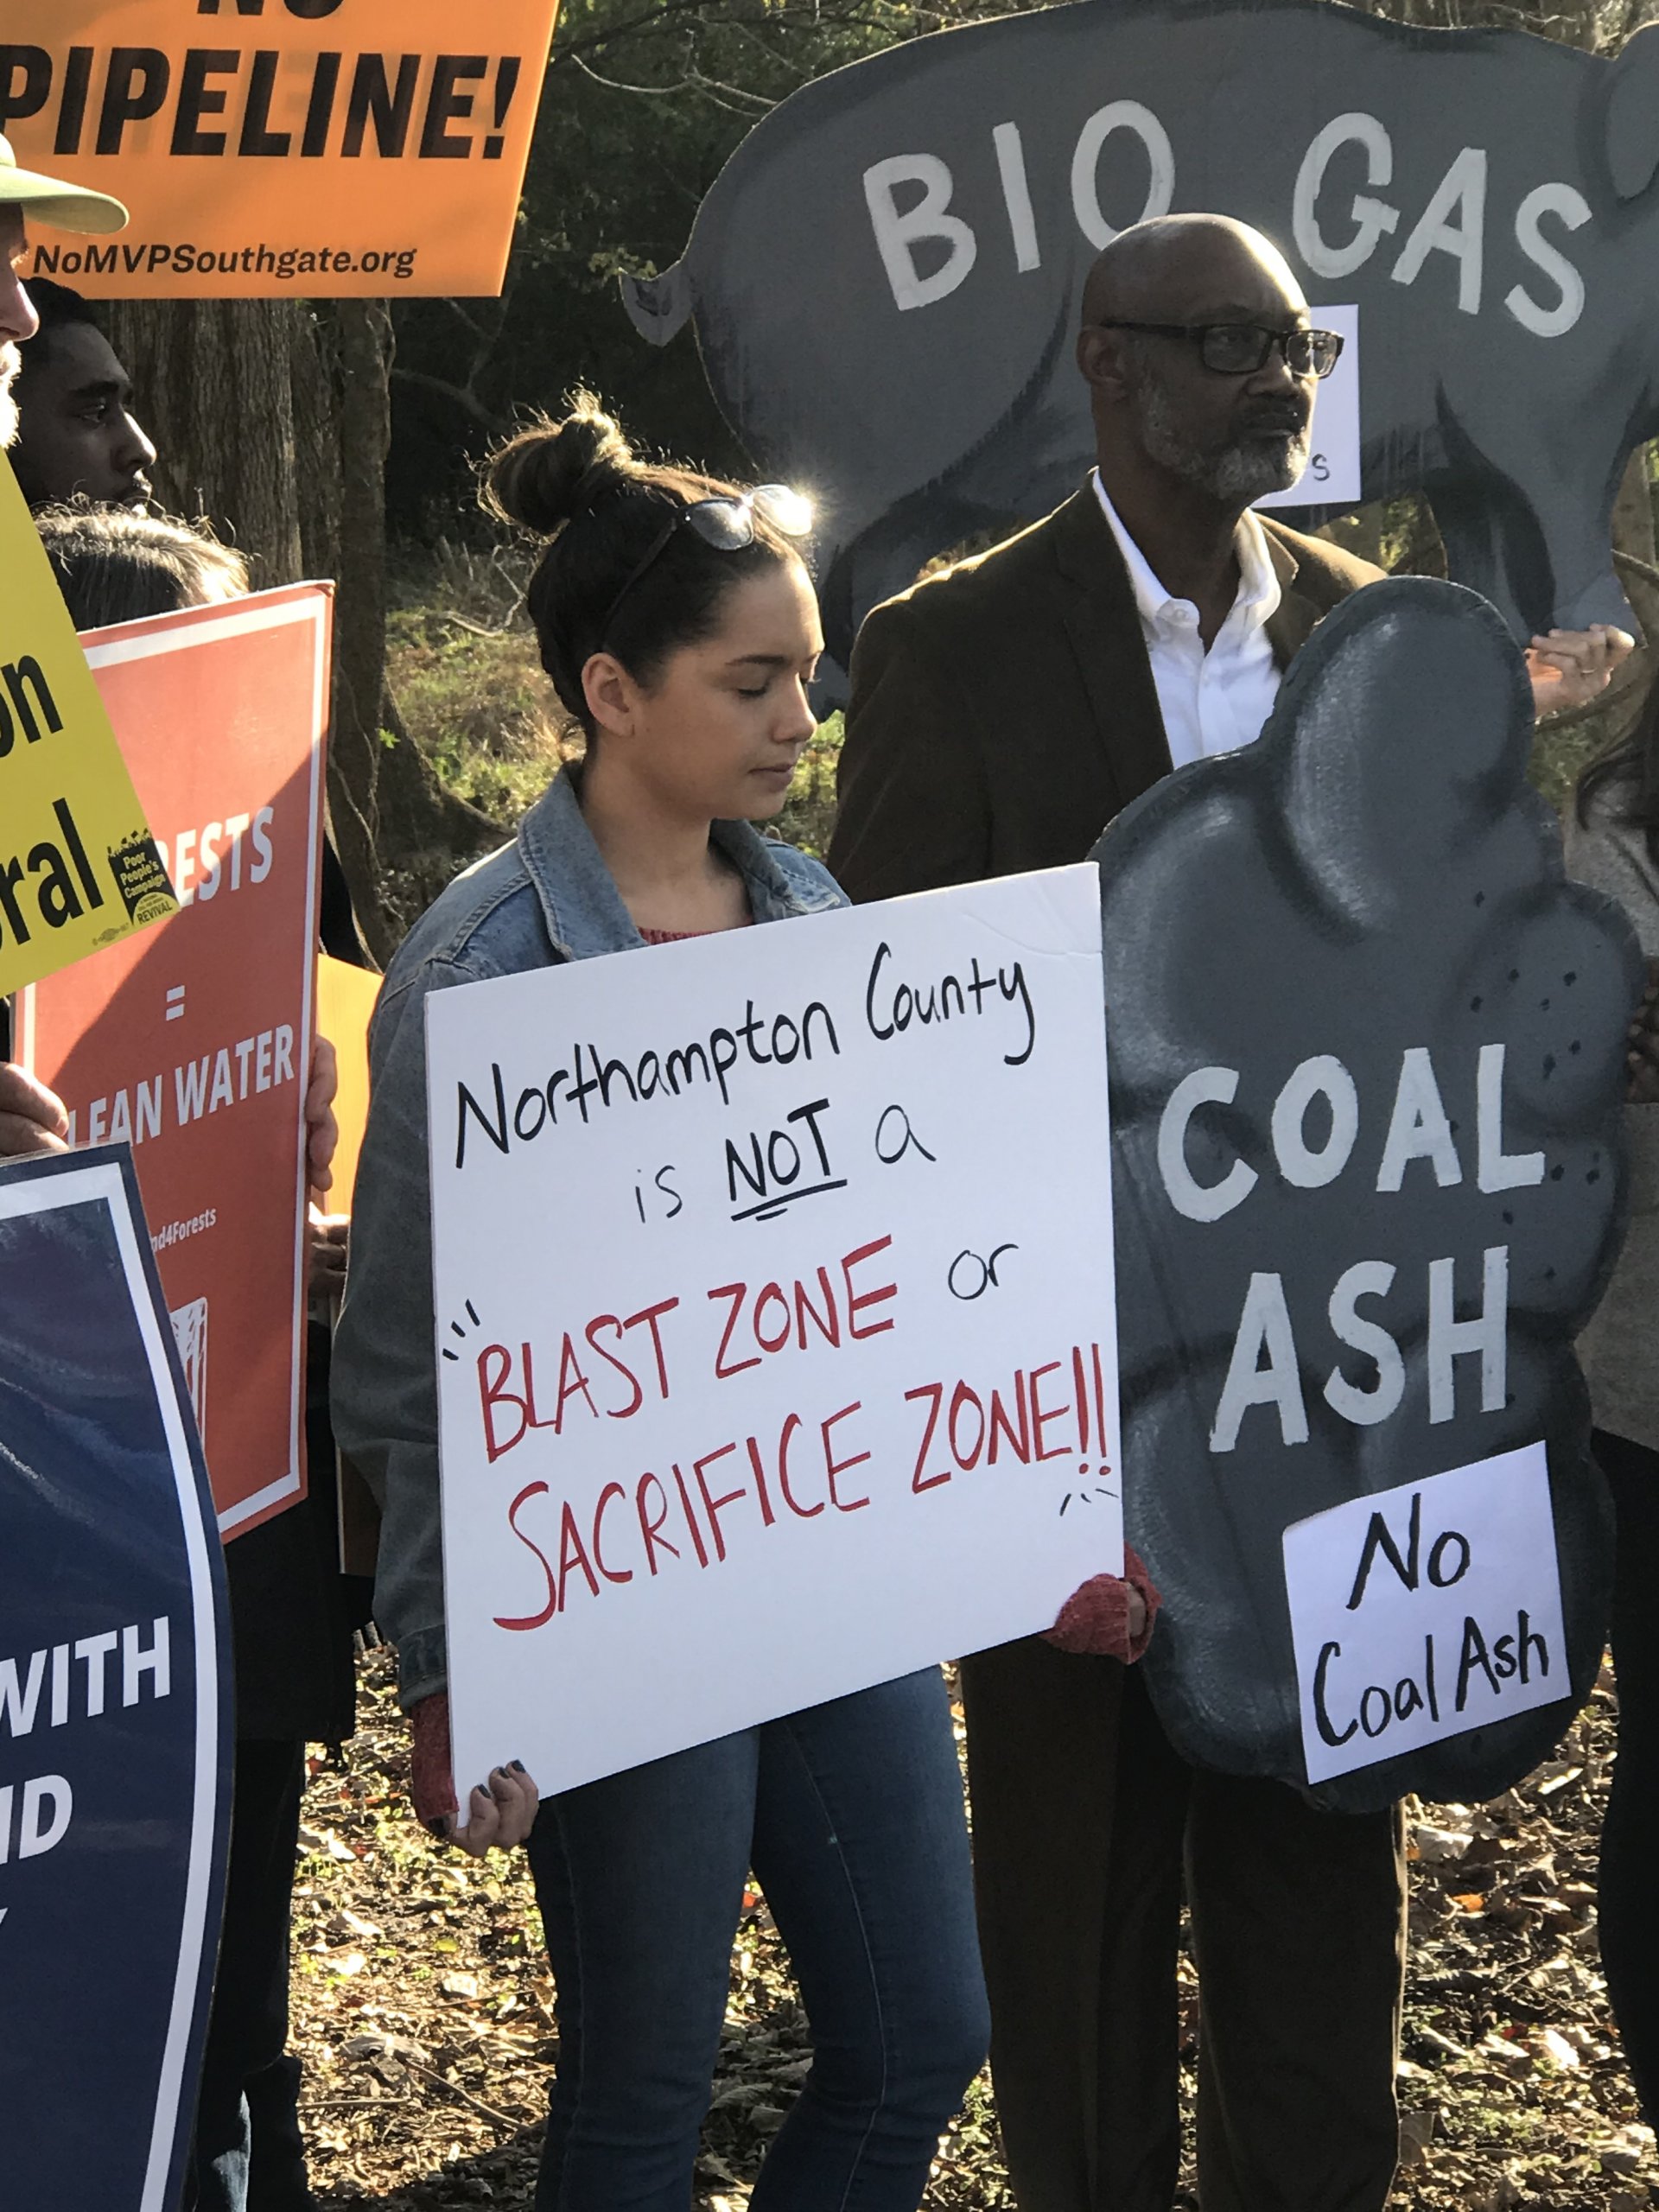 Rachel Velez of Clean Water for North Carolina holds a sign that reads "Northampton County is not a Blast Zone or Sacrifice Zone" in front of other sign-holders